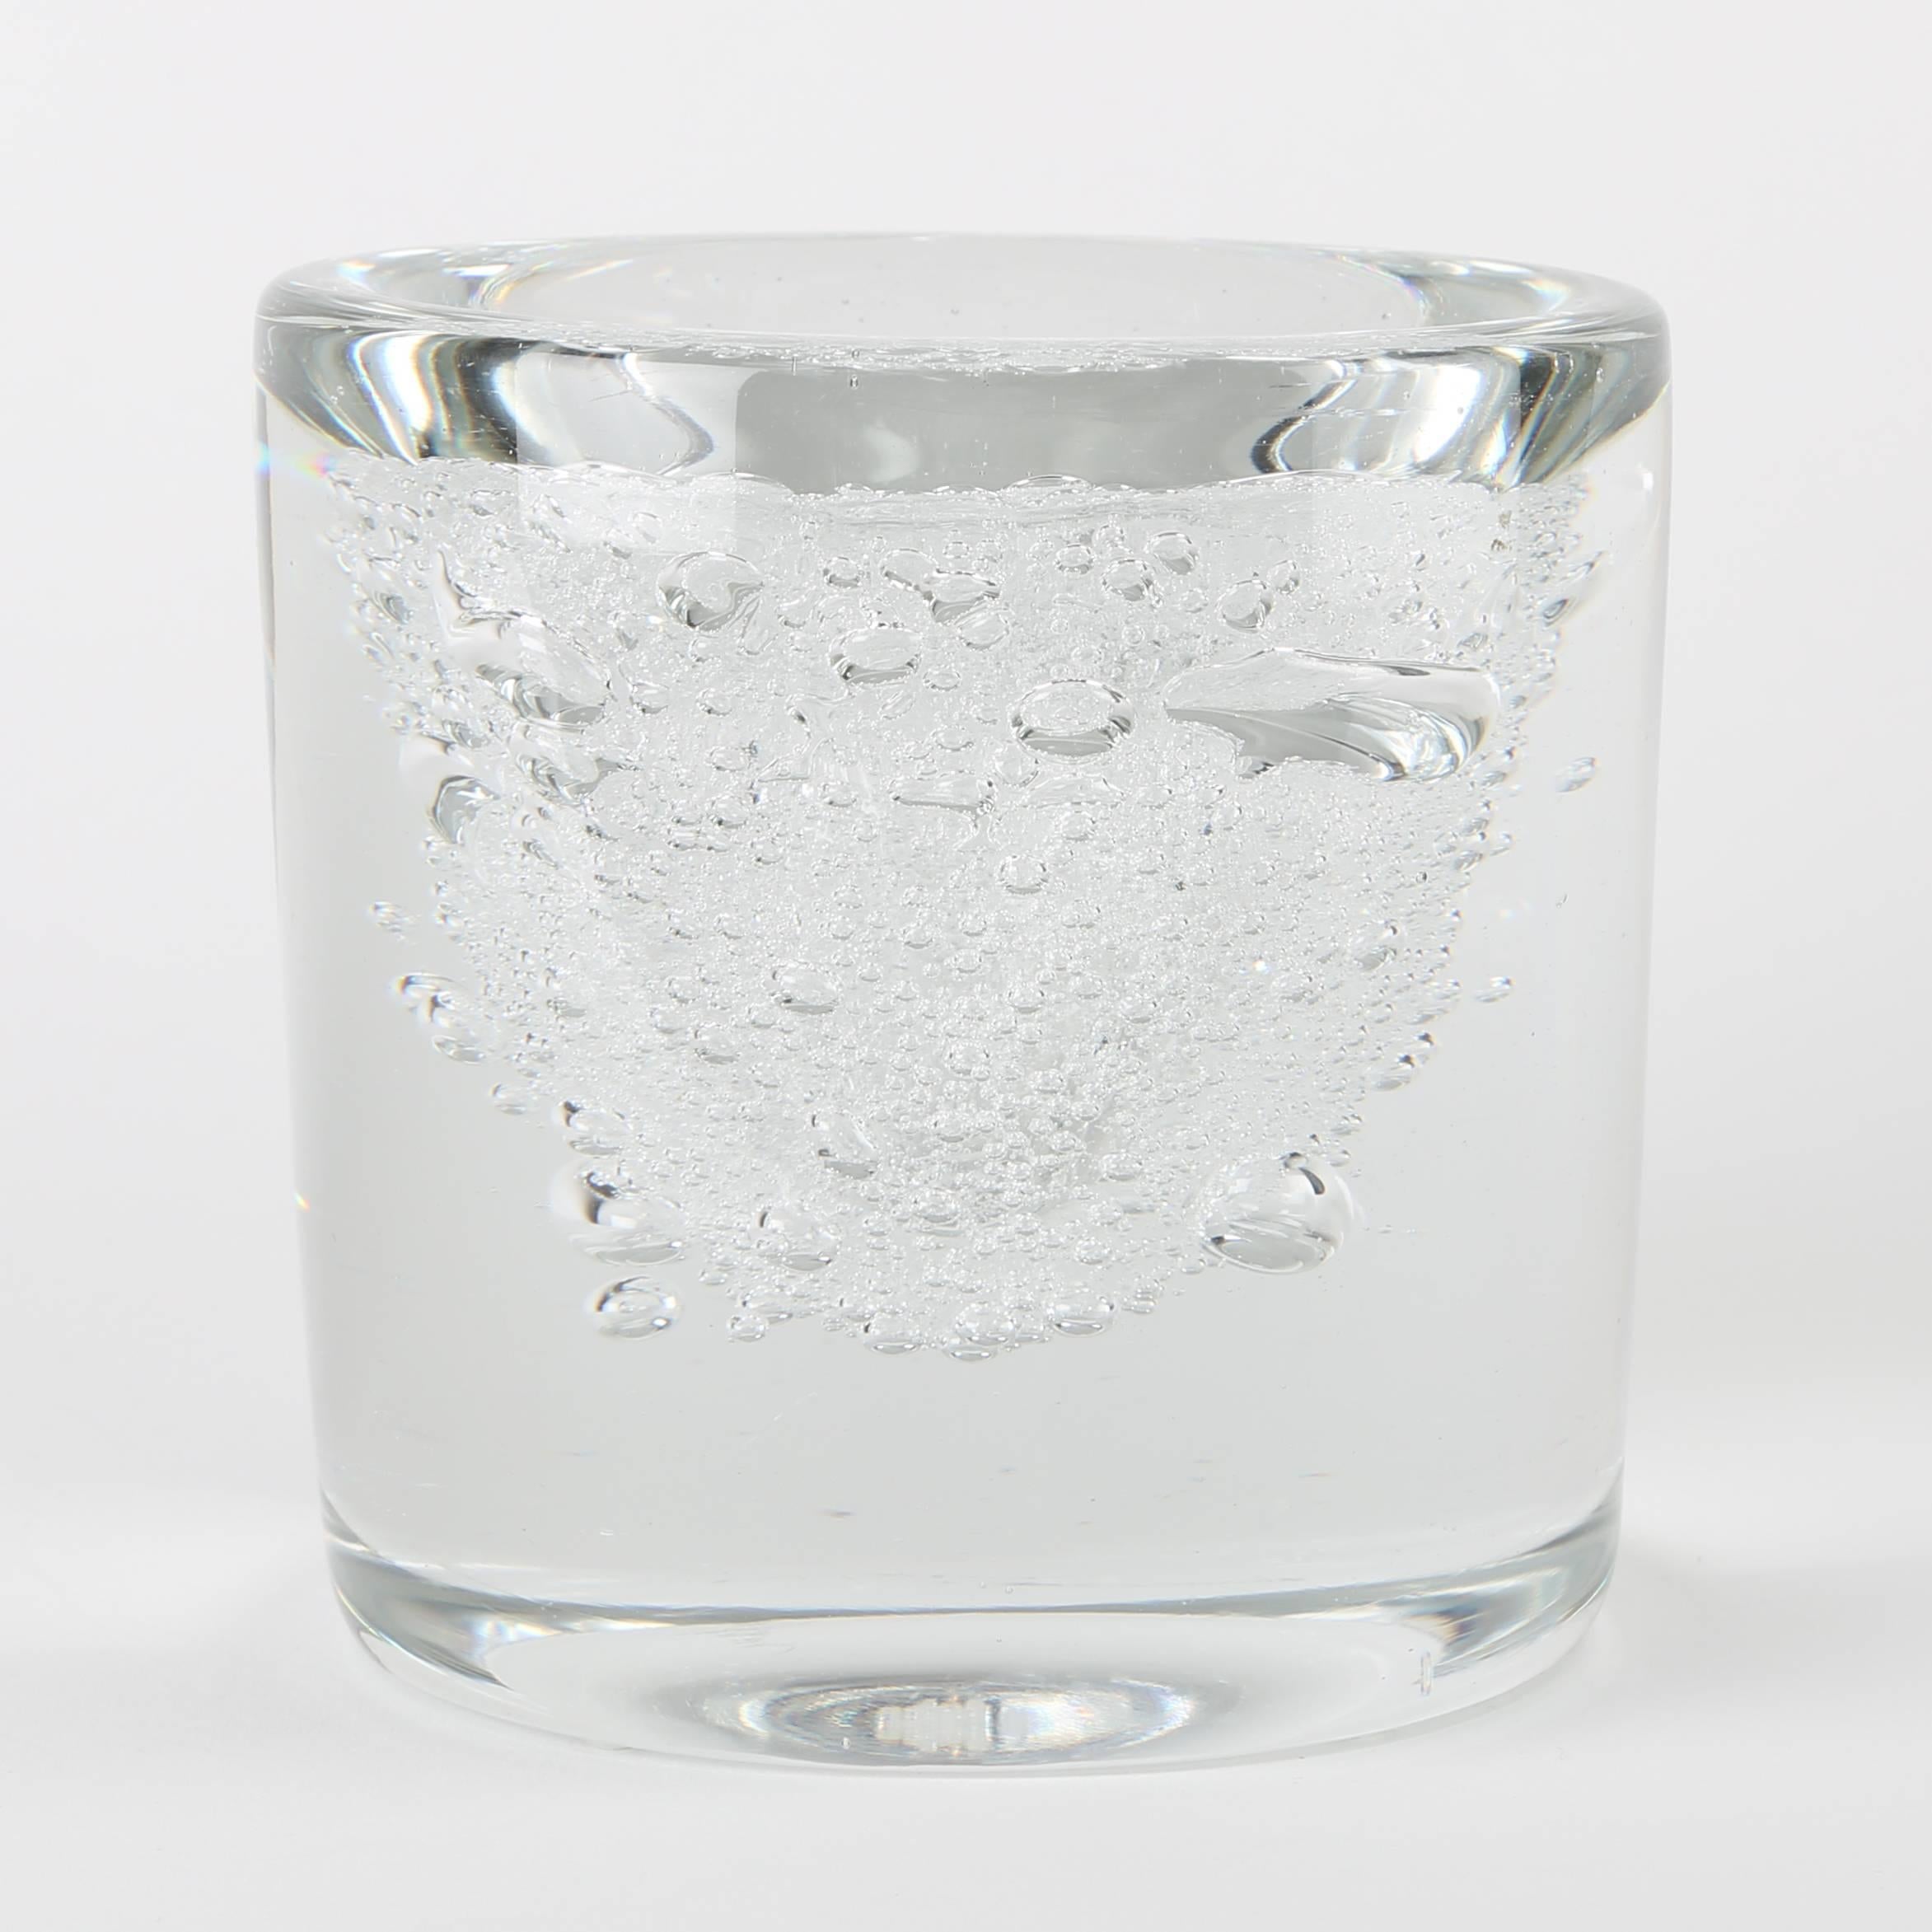 Clear Crystal Bubble Vase by Floris Meydam for Leerdam Unica, Circa 1960s For Sale 2